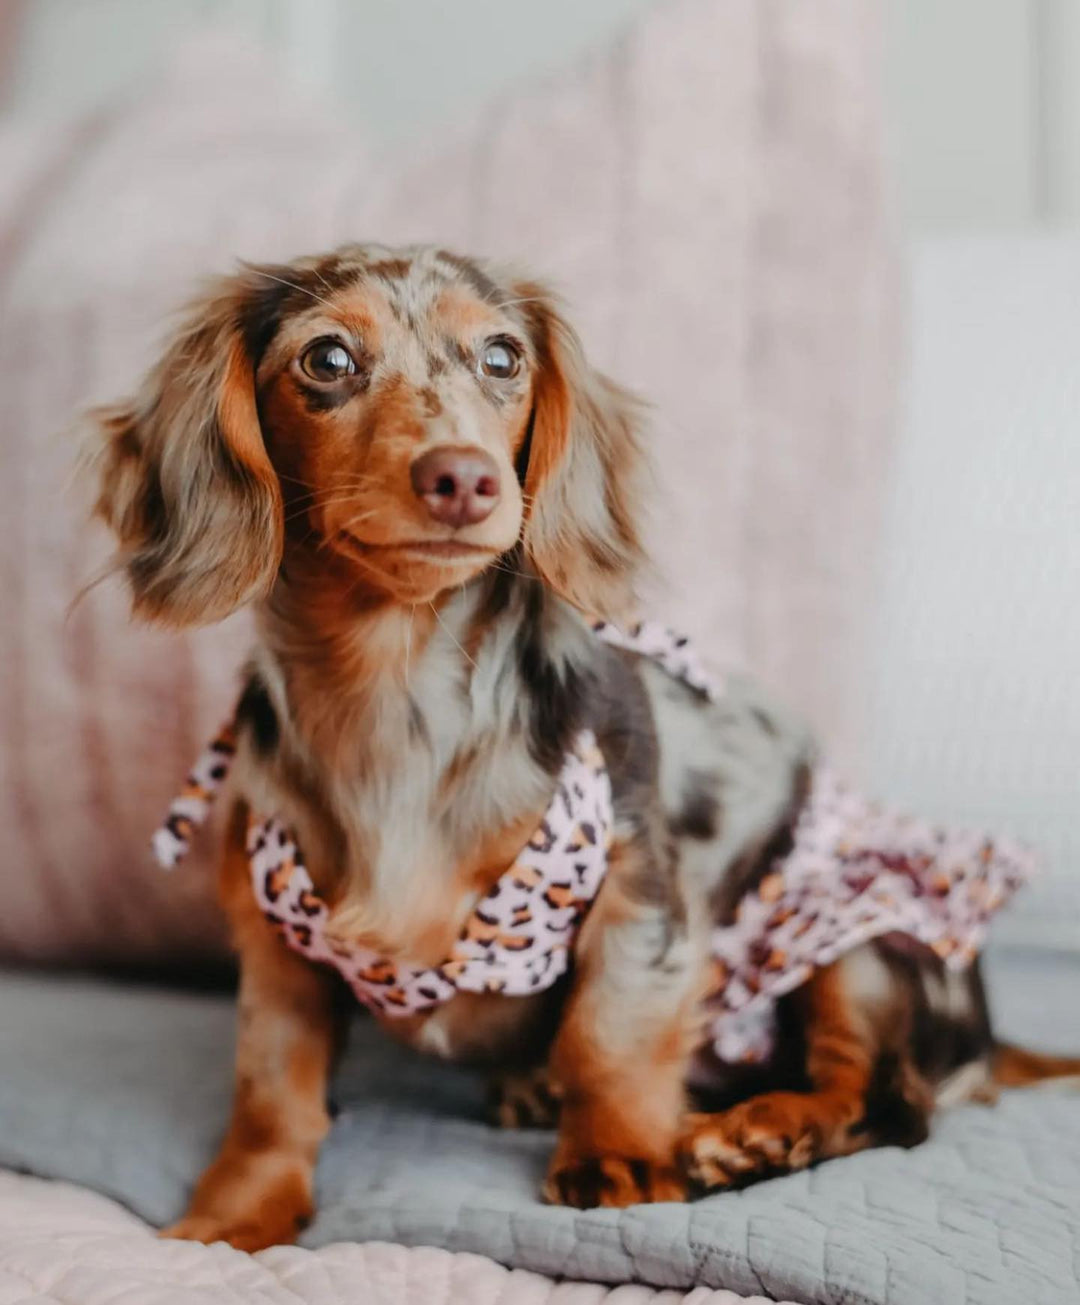 Scooping Up the Best Dachshund Gifts? Here’s the Inside Track!